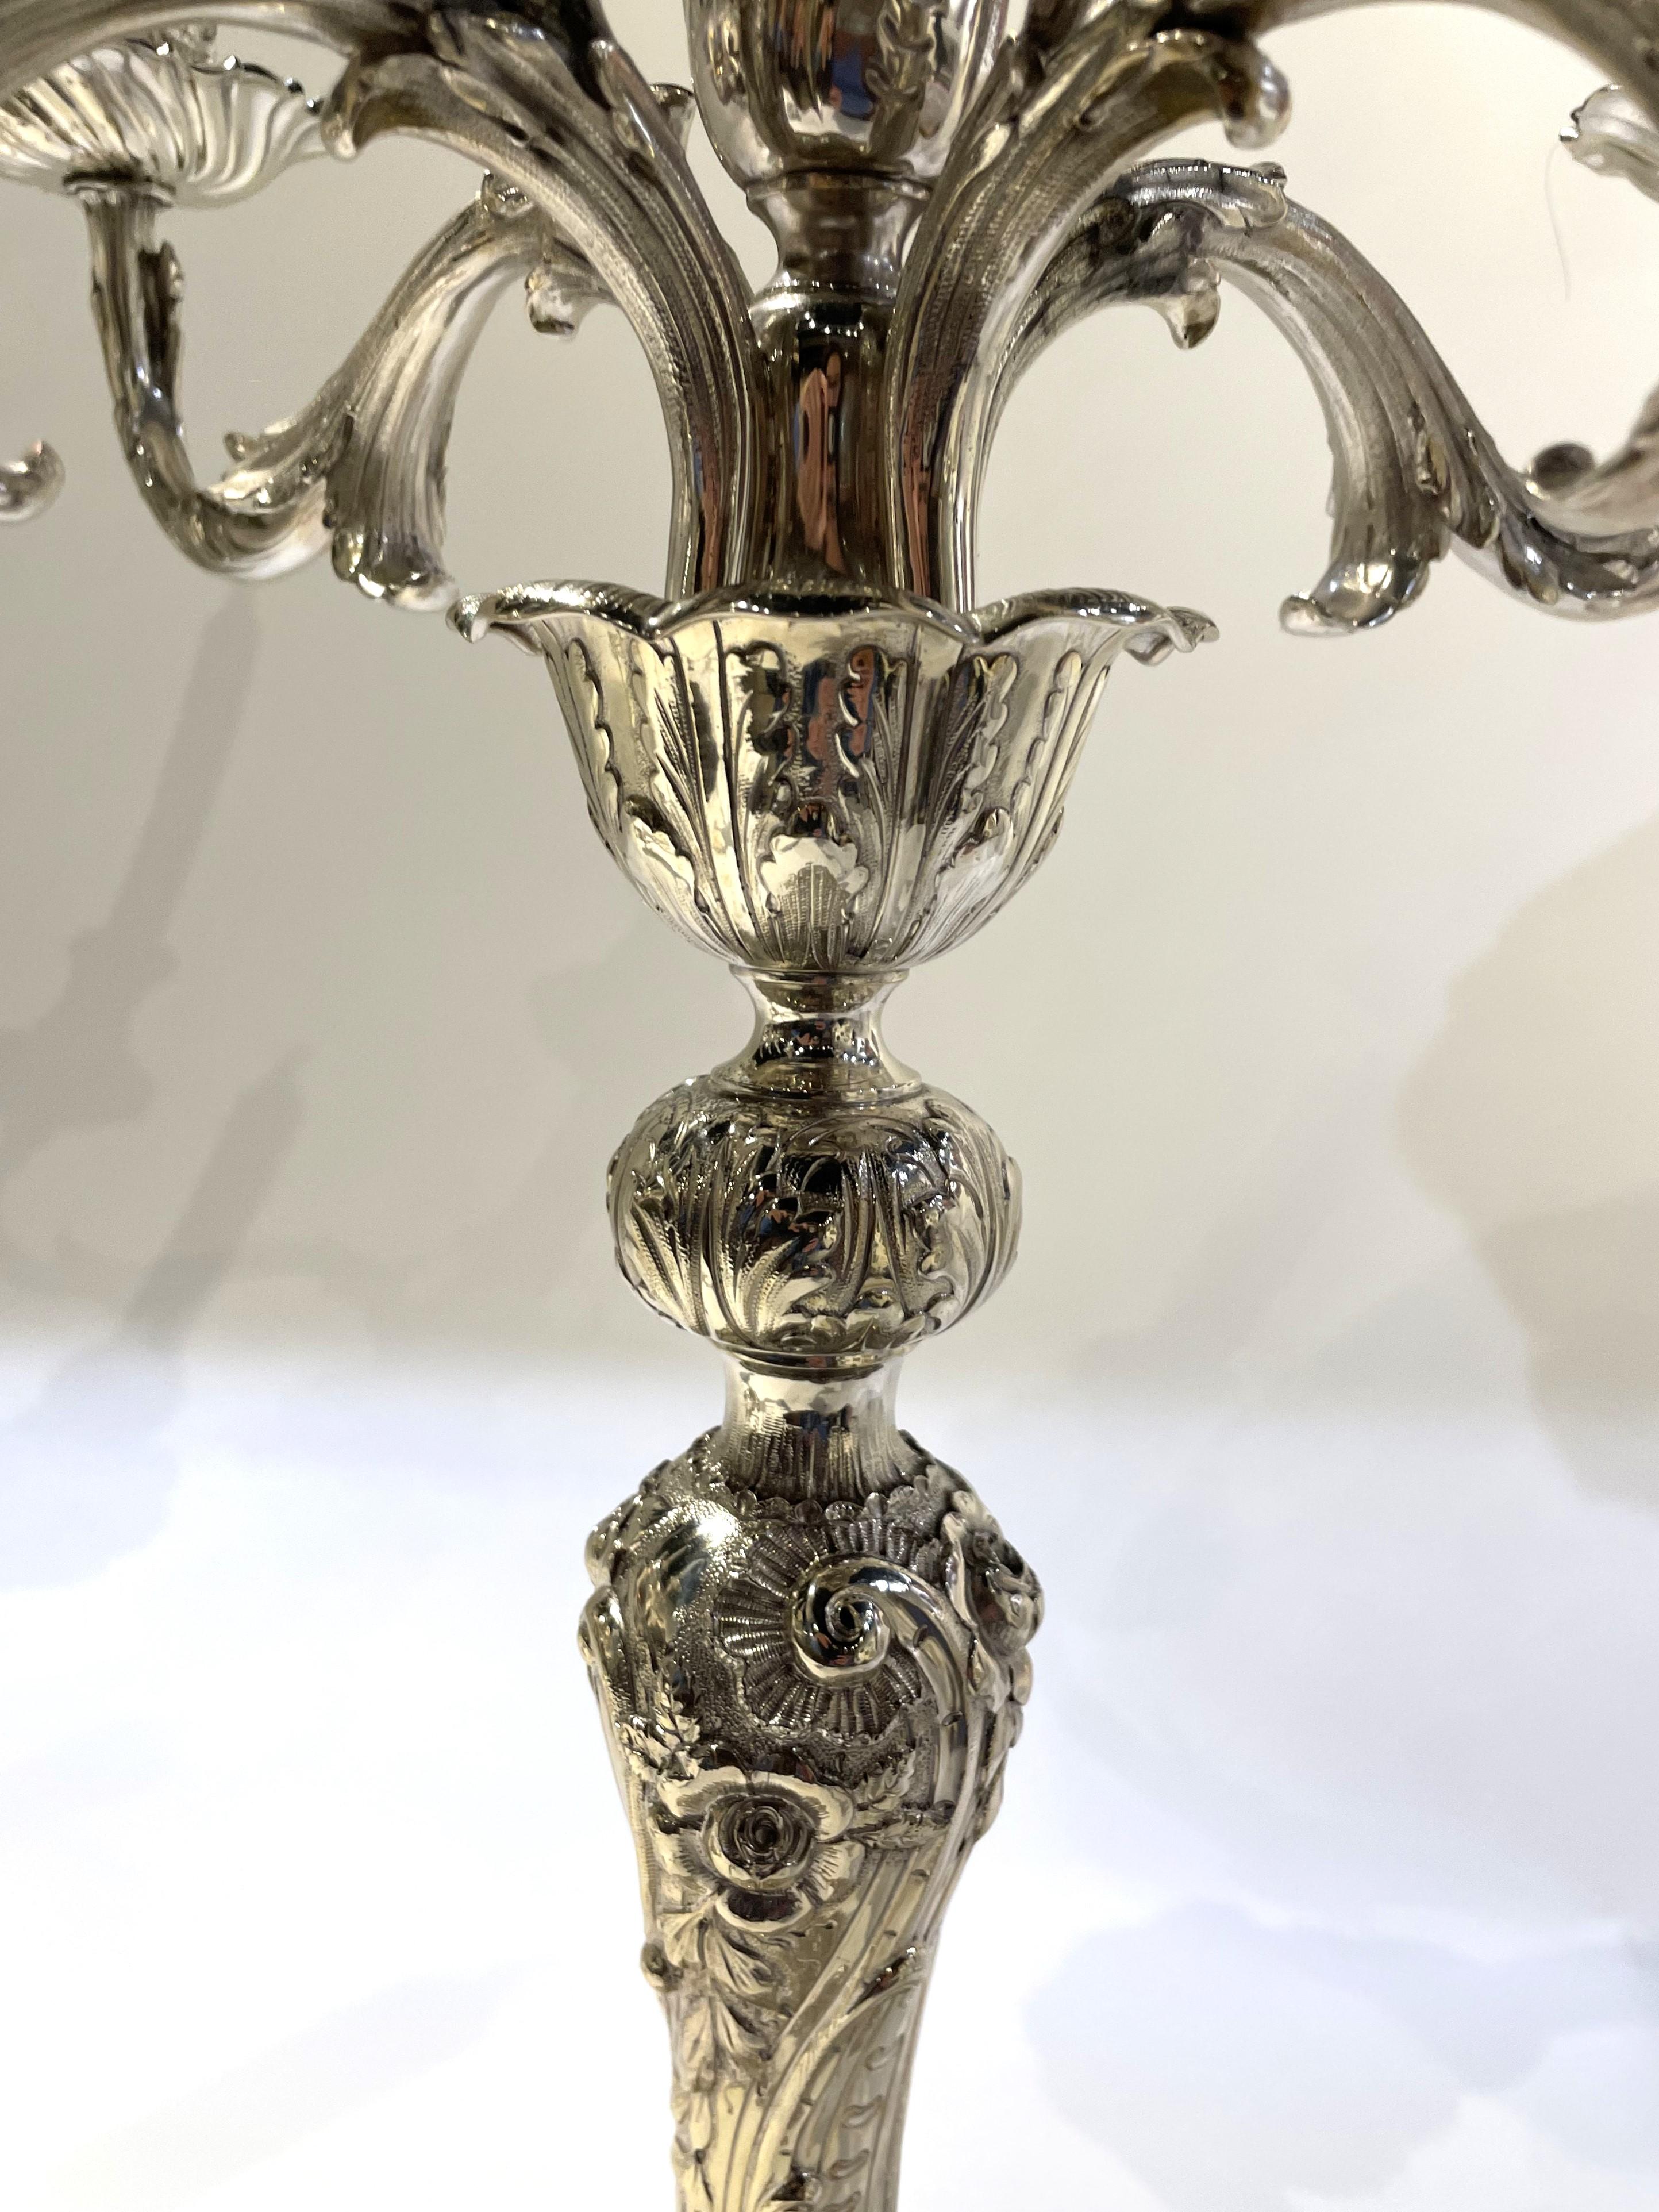 Pair of Tiffany & Co. Sterling Silver 5-Light Monumental Repousse Candelabra For Sale 1